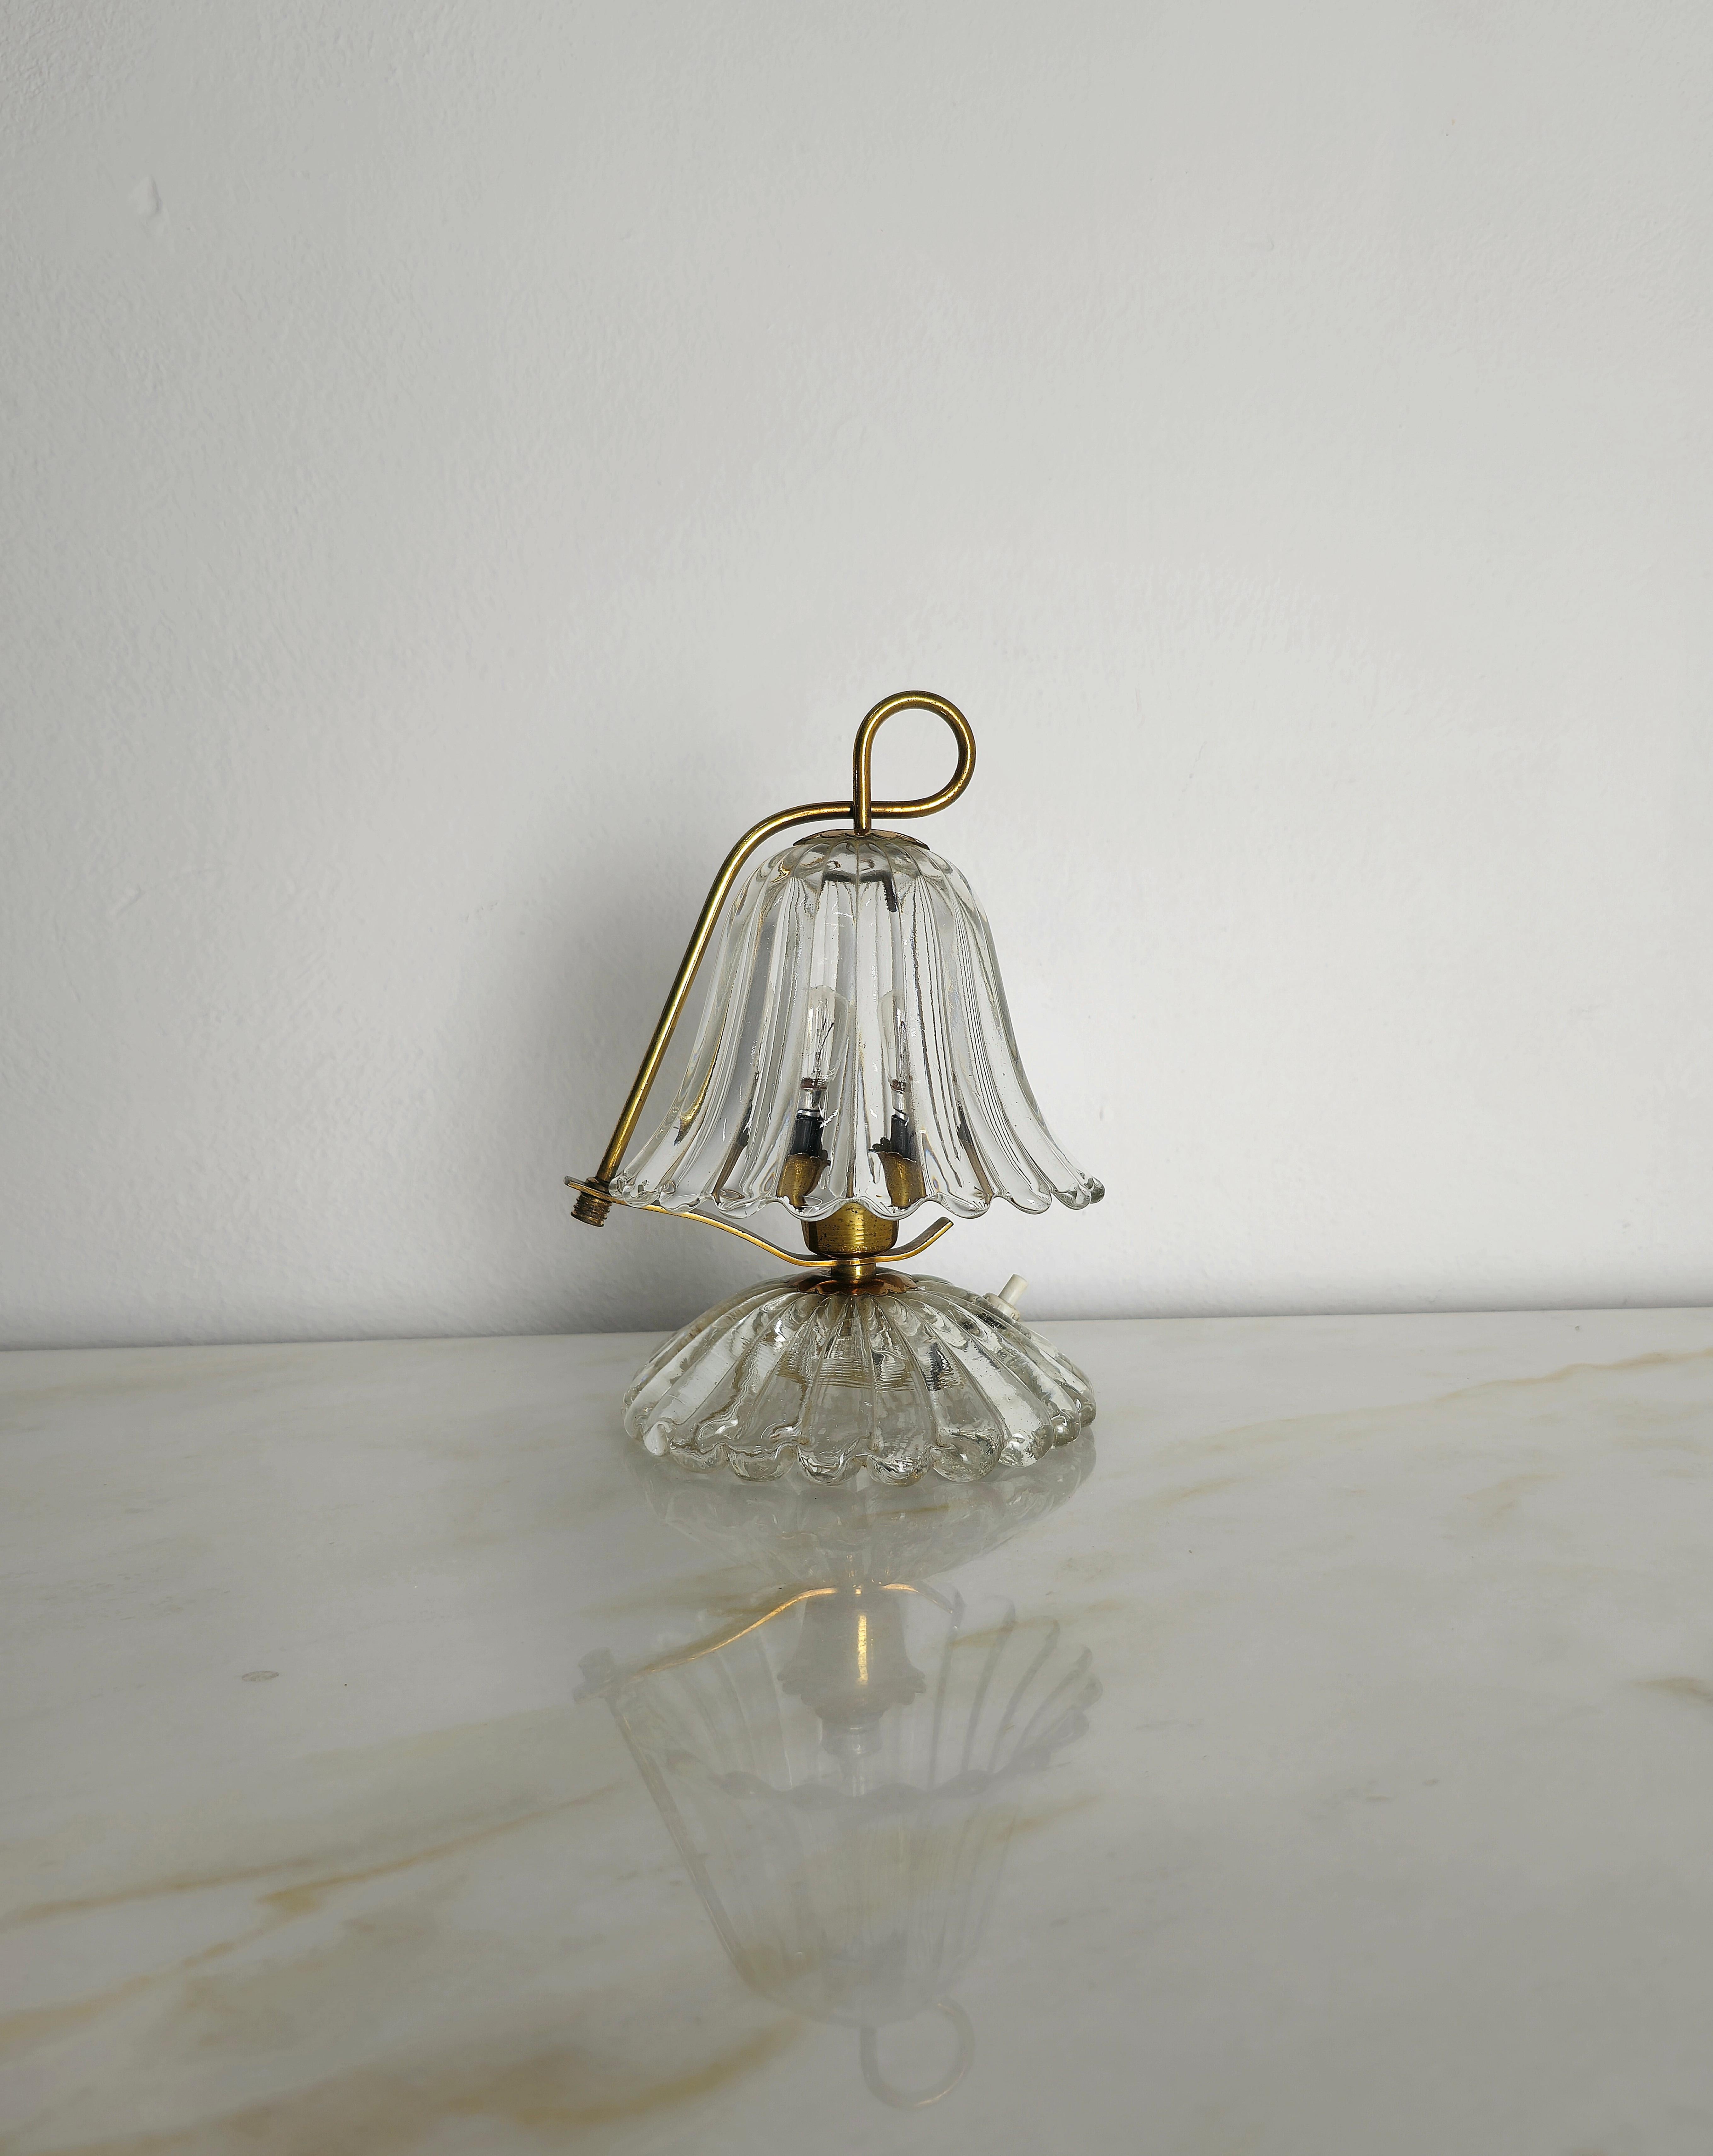 Small table lamp produced in Italy in the 1940s by Barovier and Toso.
The table lamp is made of brass and Murano glass, with the particularity of having the upper glass adjustable to the right or left, as can be seen in the video.



Note: We try to